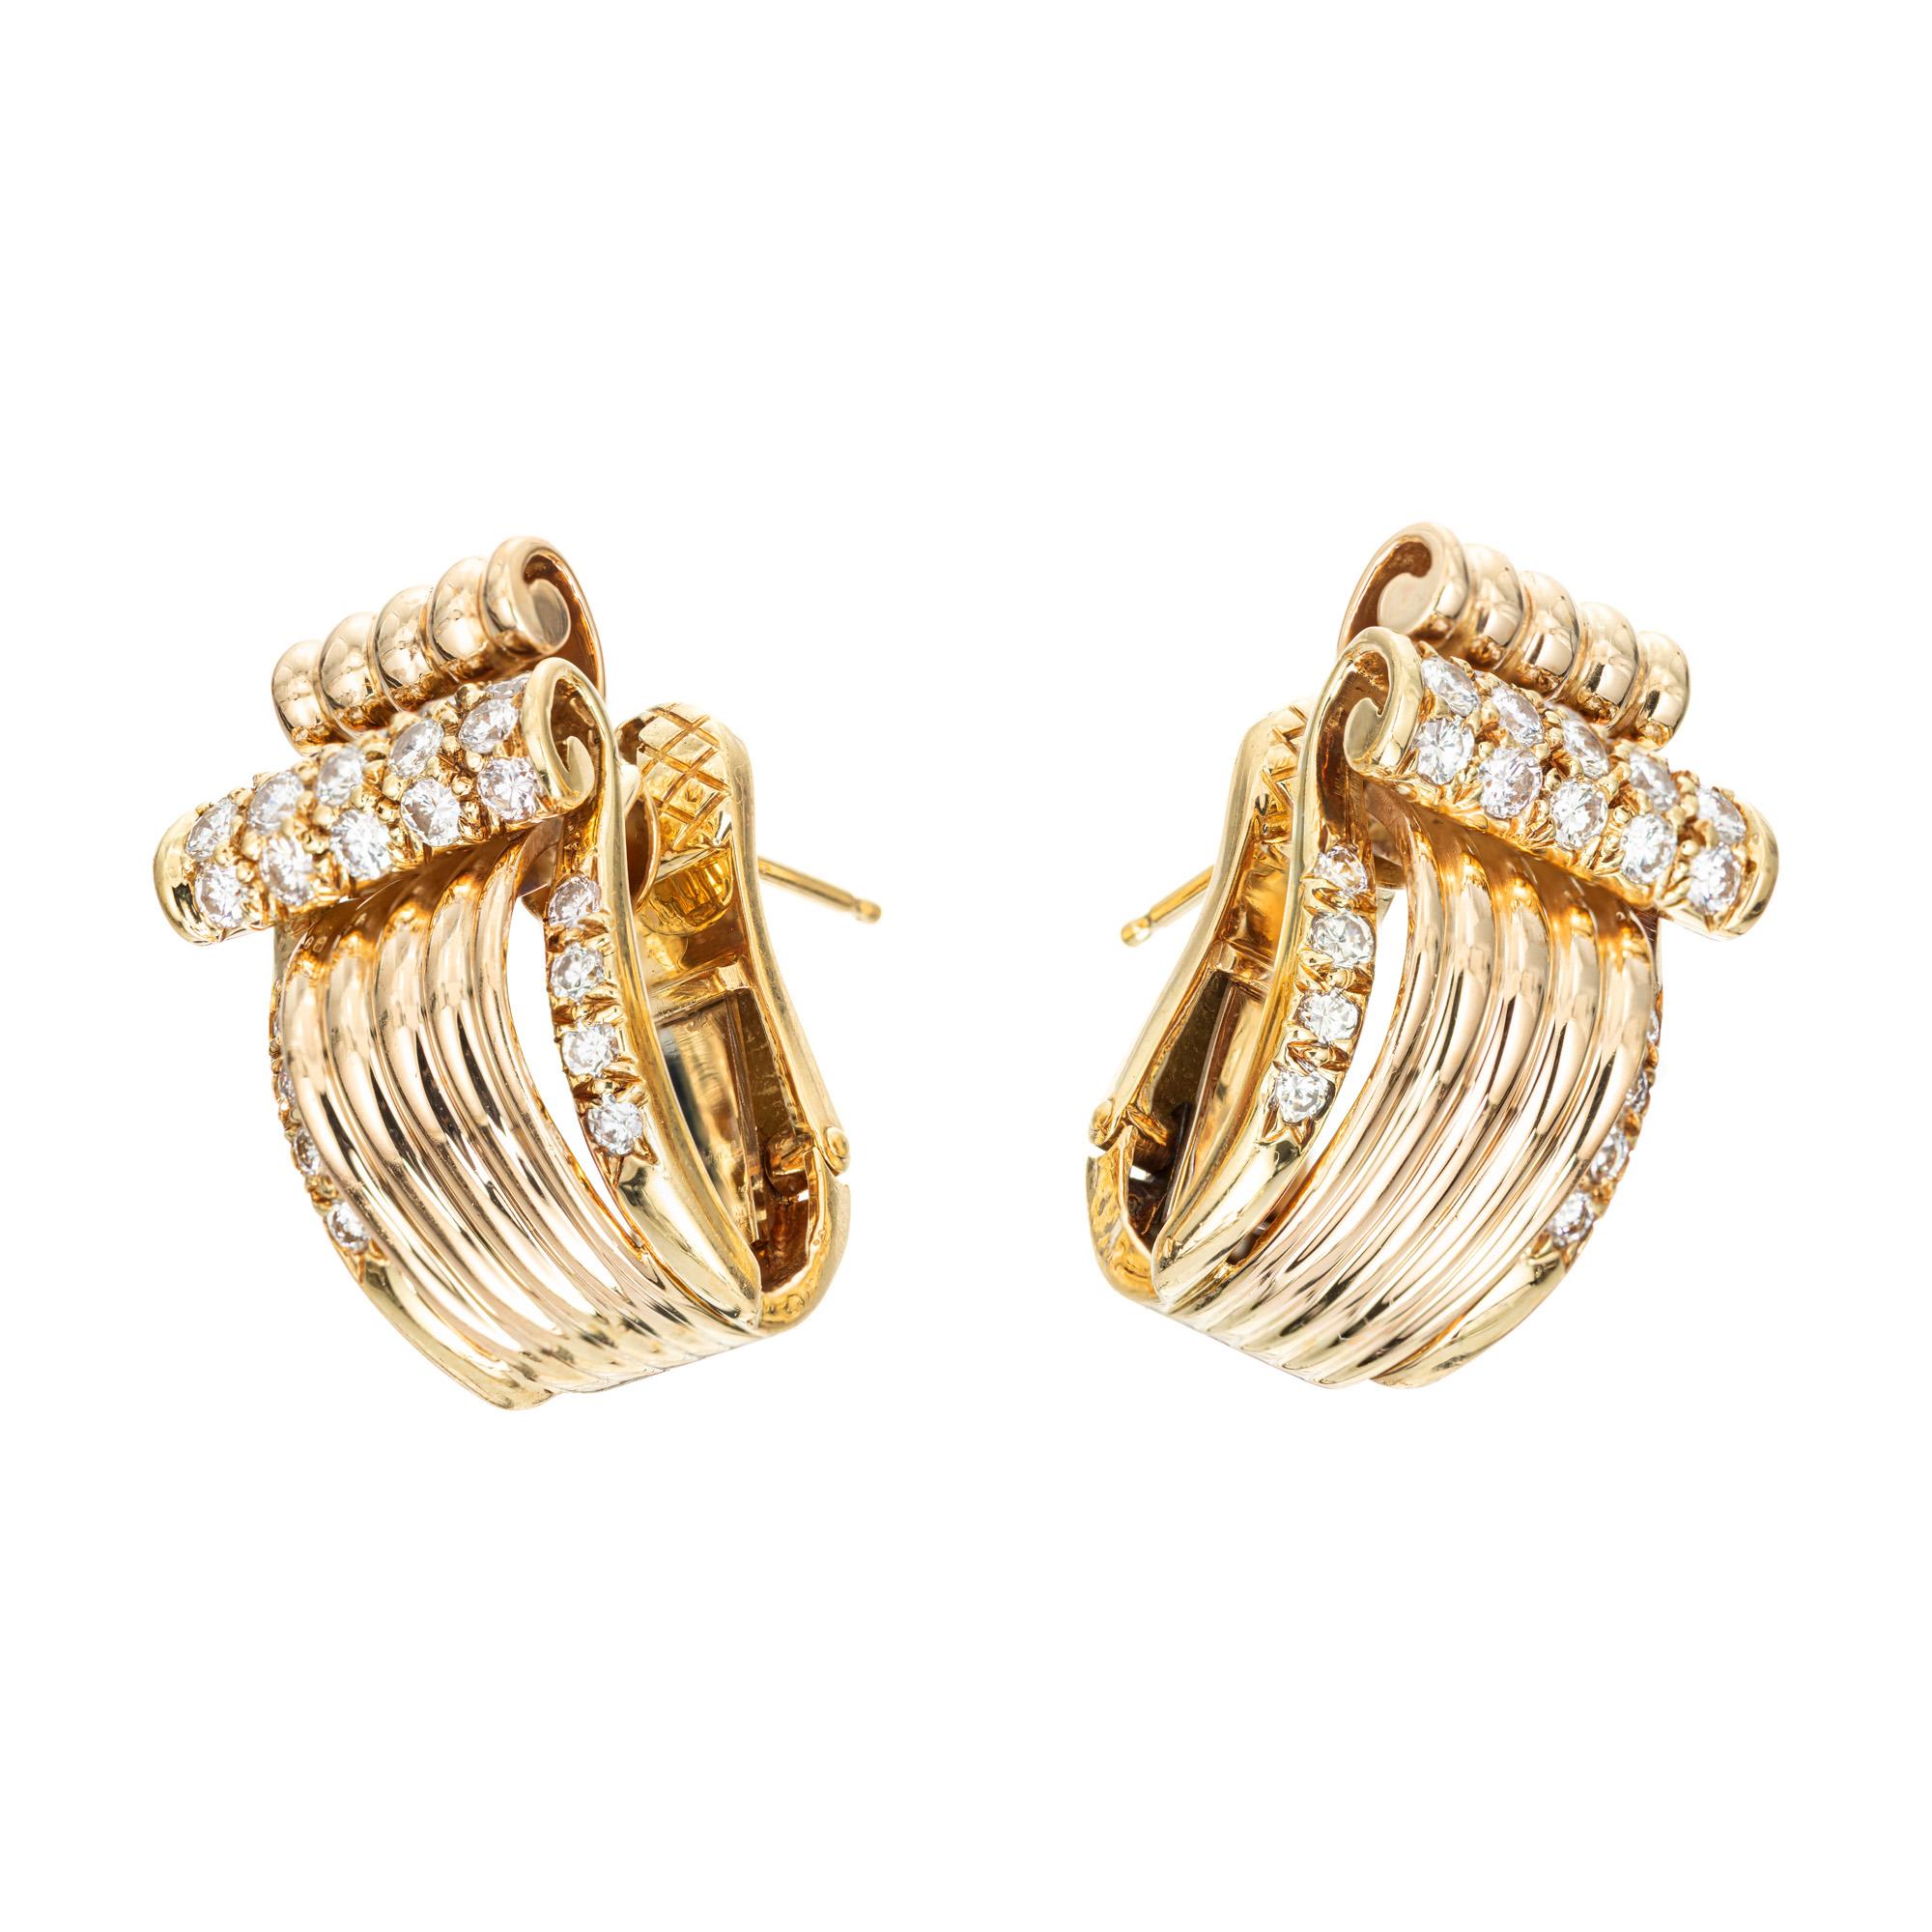 Glamours 1940's gold double 3-D swirl design diamond clip post earrings. Featuring 46 full cut diamonds set in 18k yellow gold crafted settings with heavy secure clips and posts. Elegant and timeless.  

46 full cut diamonds, approx. total weight